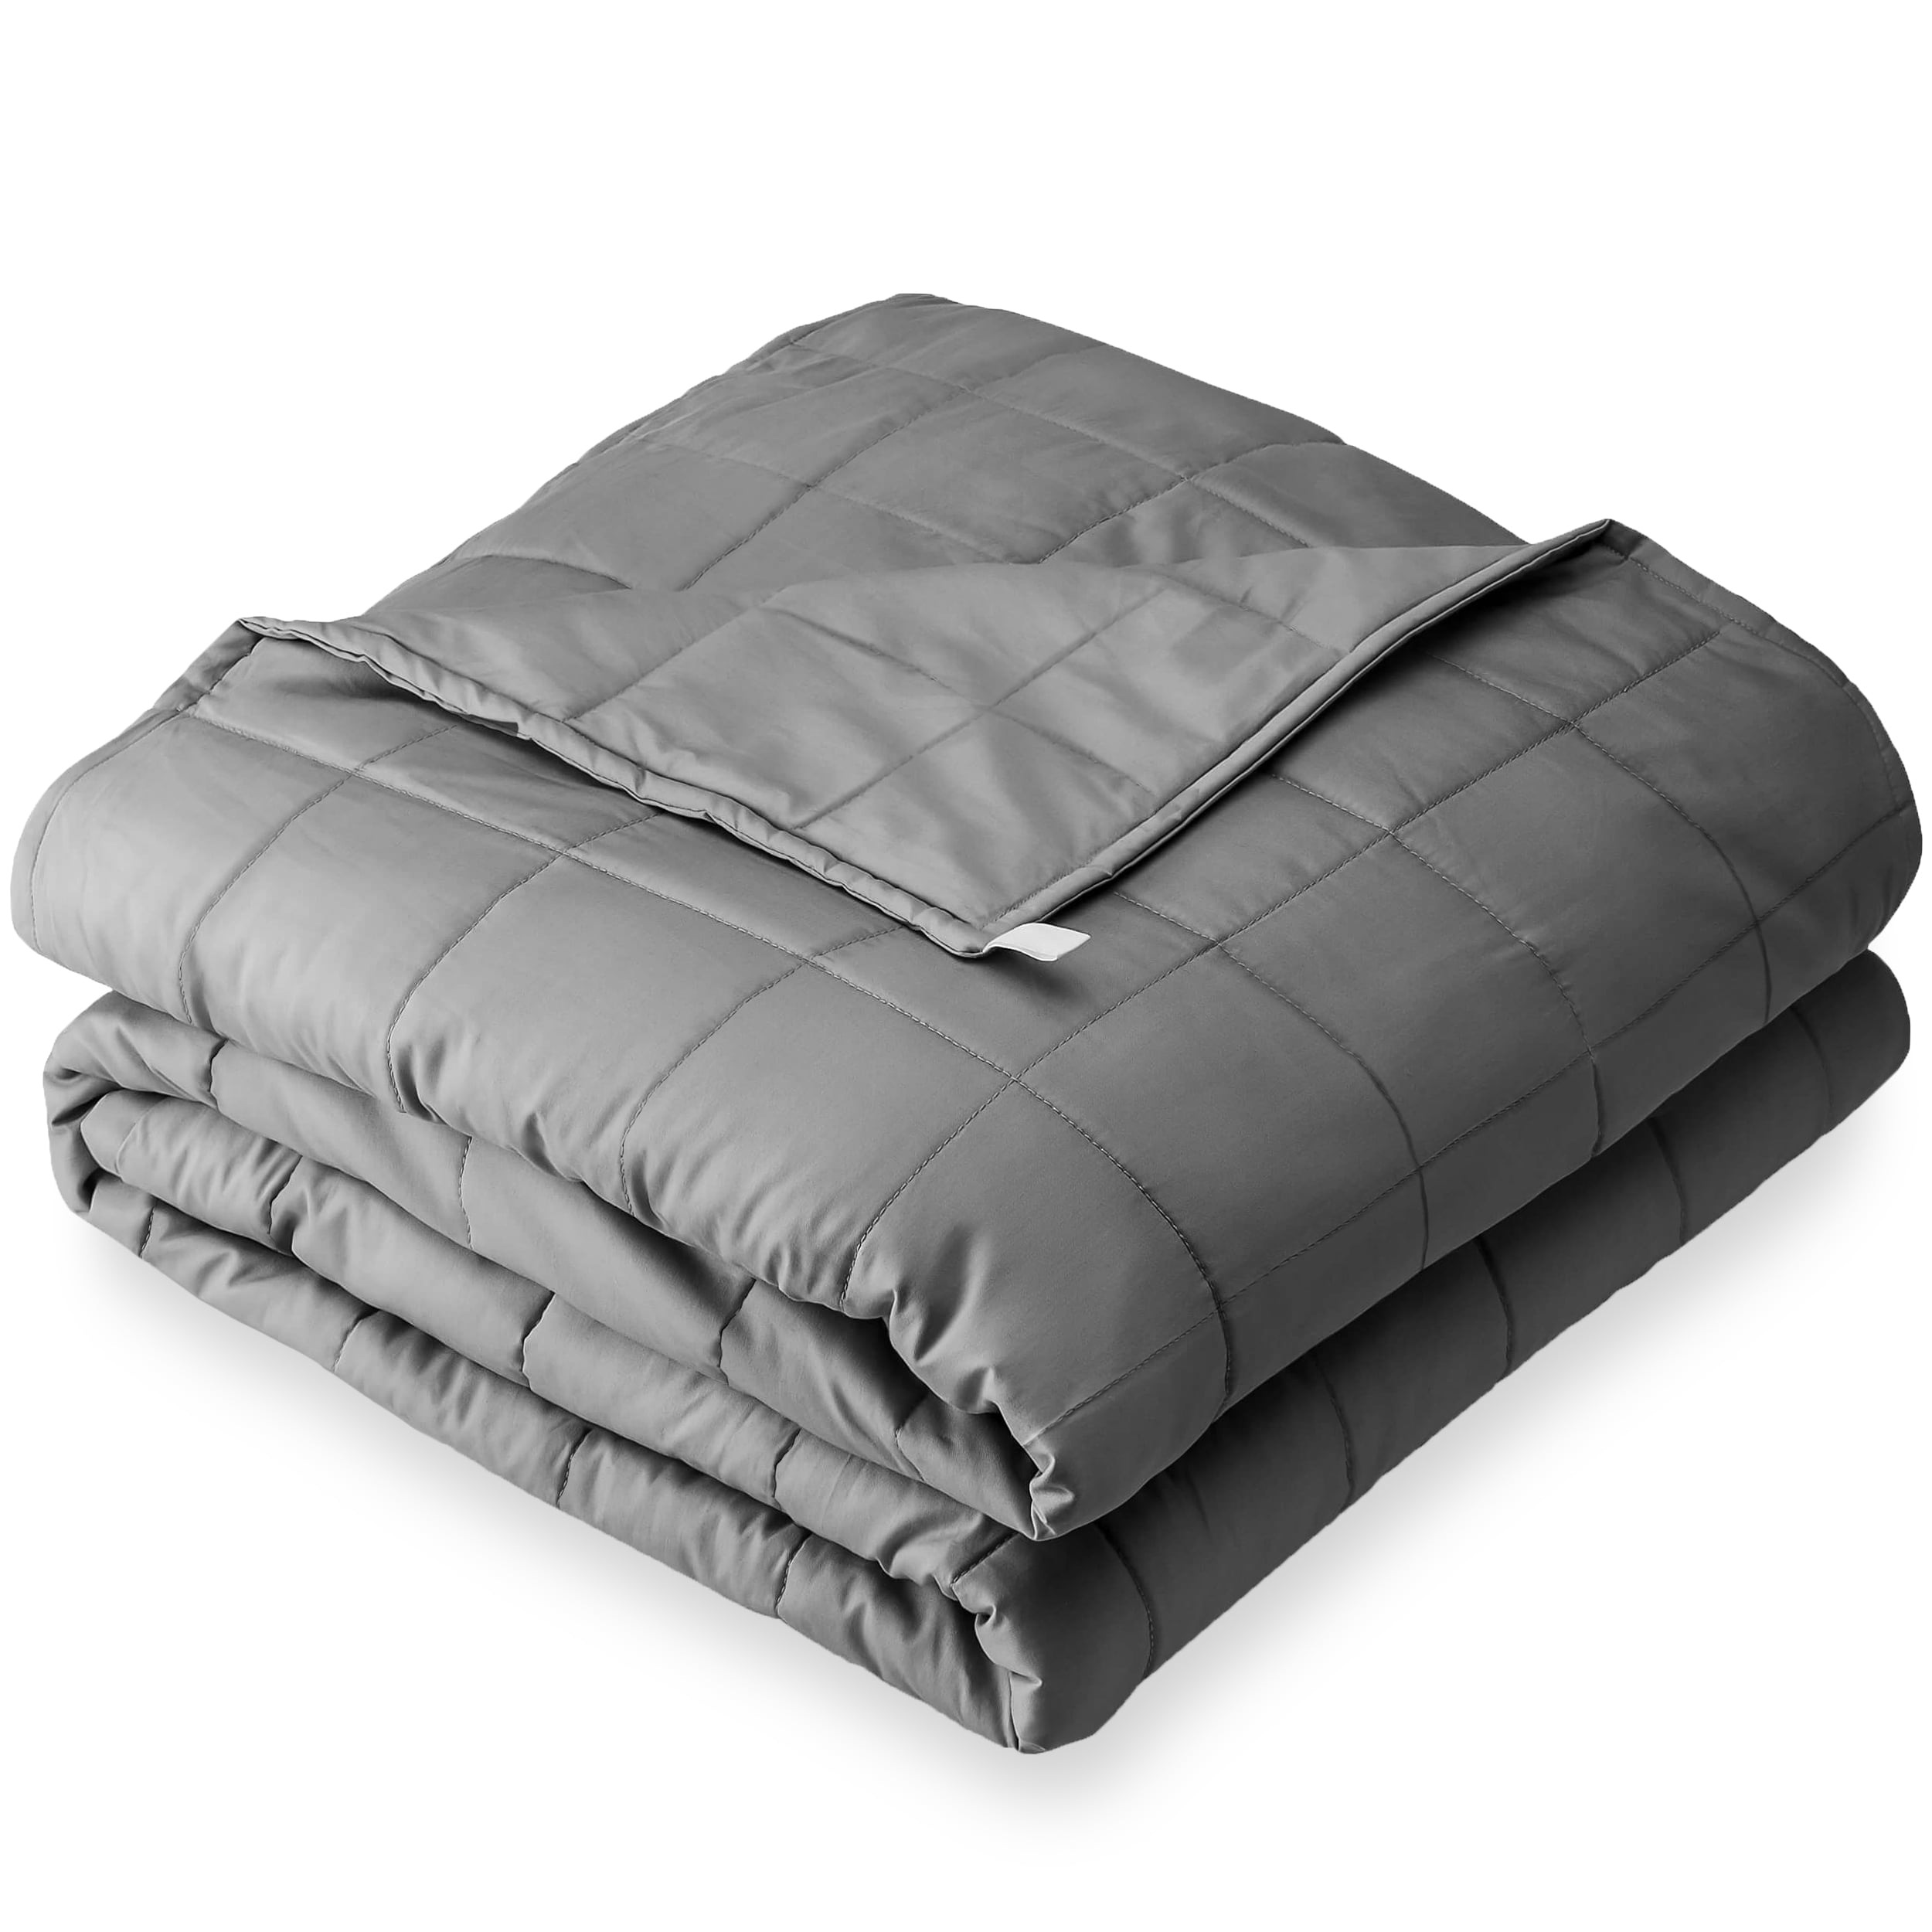 48x78, 12 lbs for 100-140lbs Individuals, Light Gray Weighted Idea Weighted Blanket for Adult Woman and Man Cotton